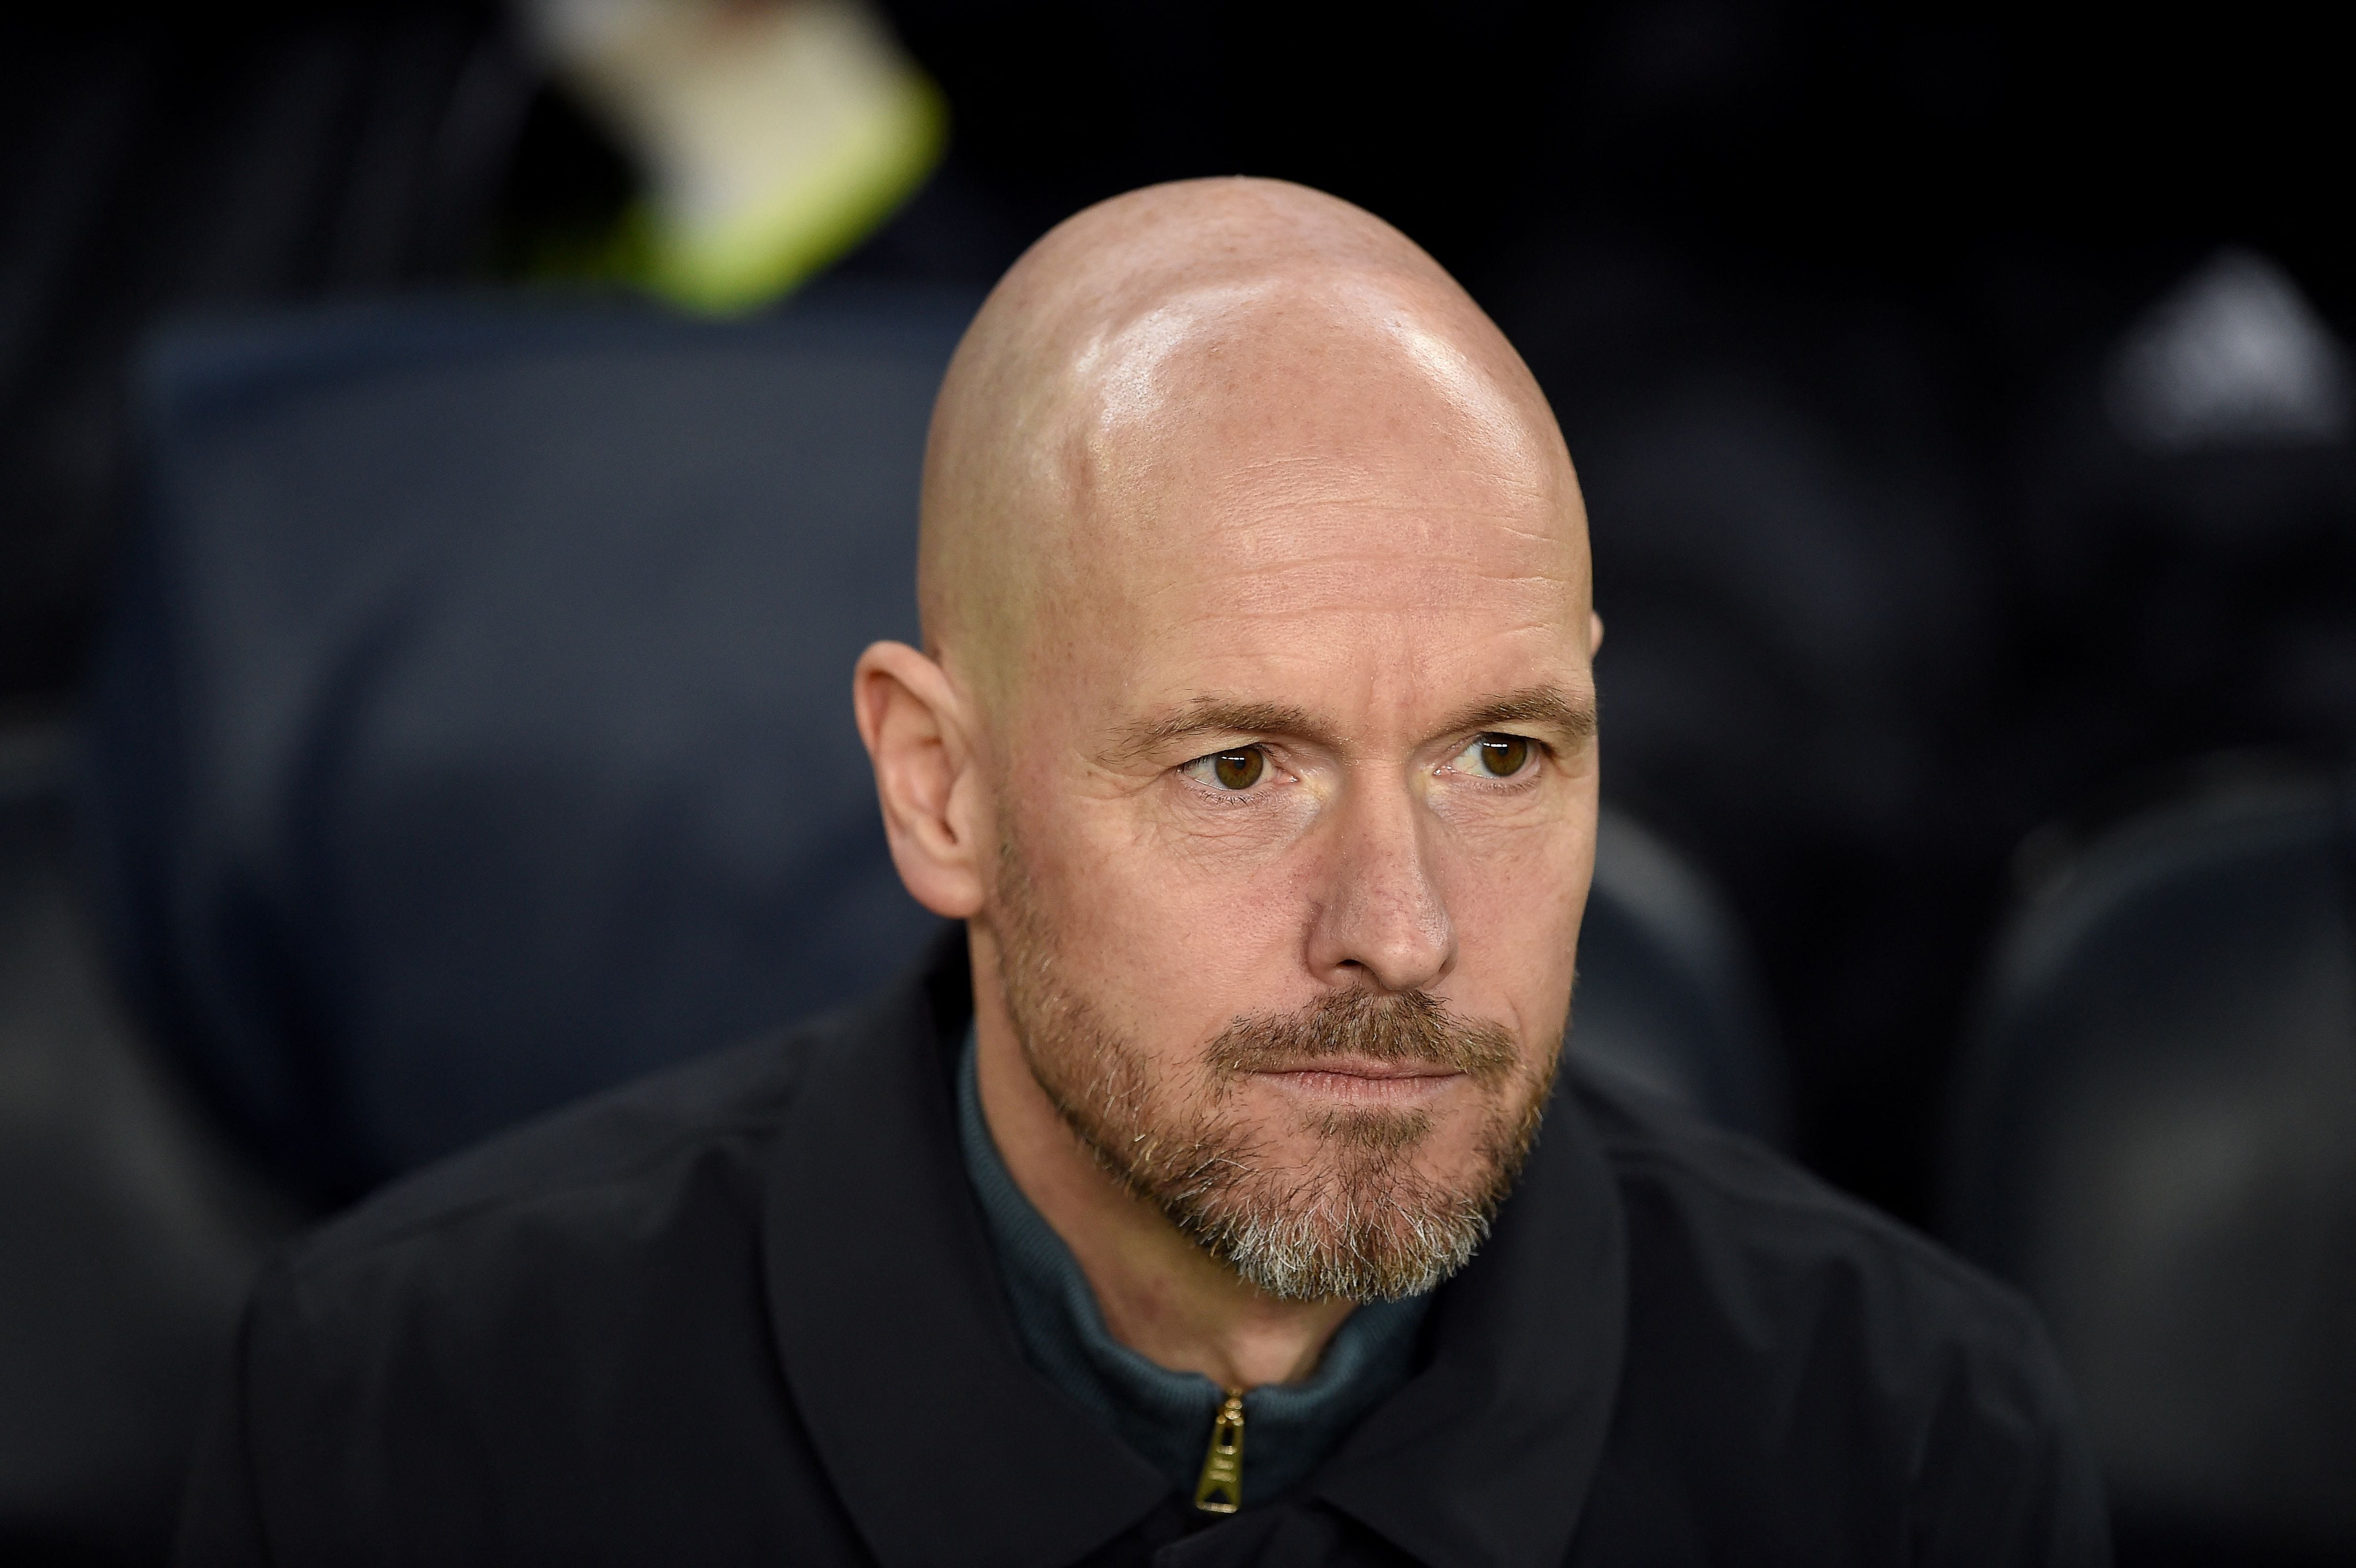 Erik Ten Hag's one previous game at Anfield